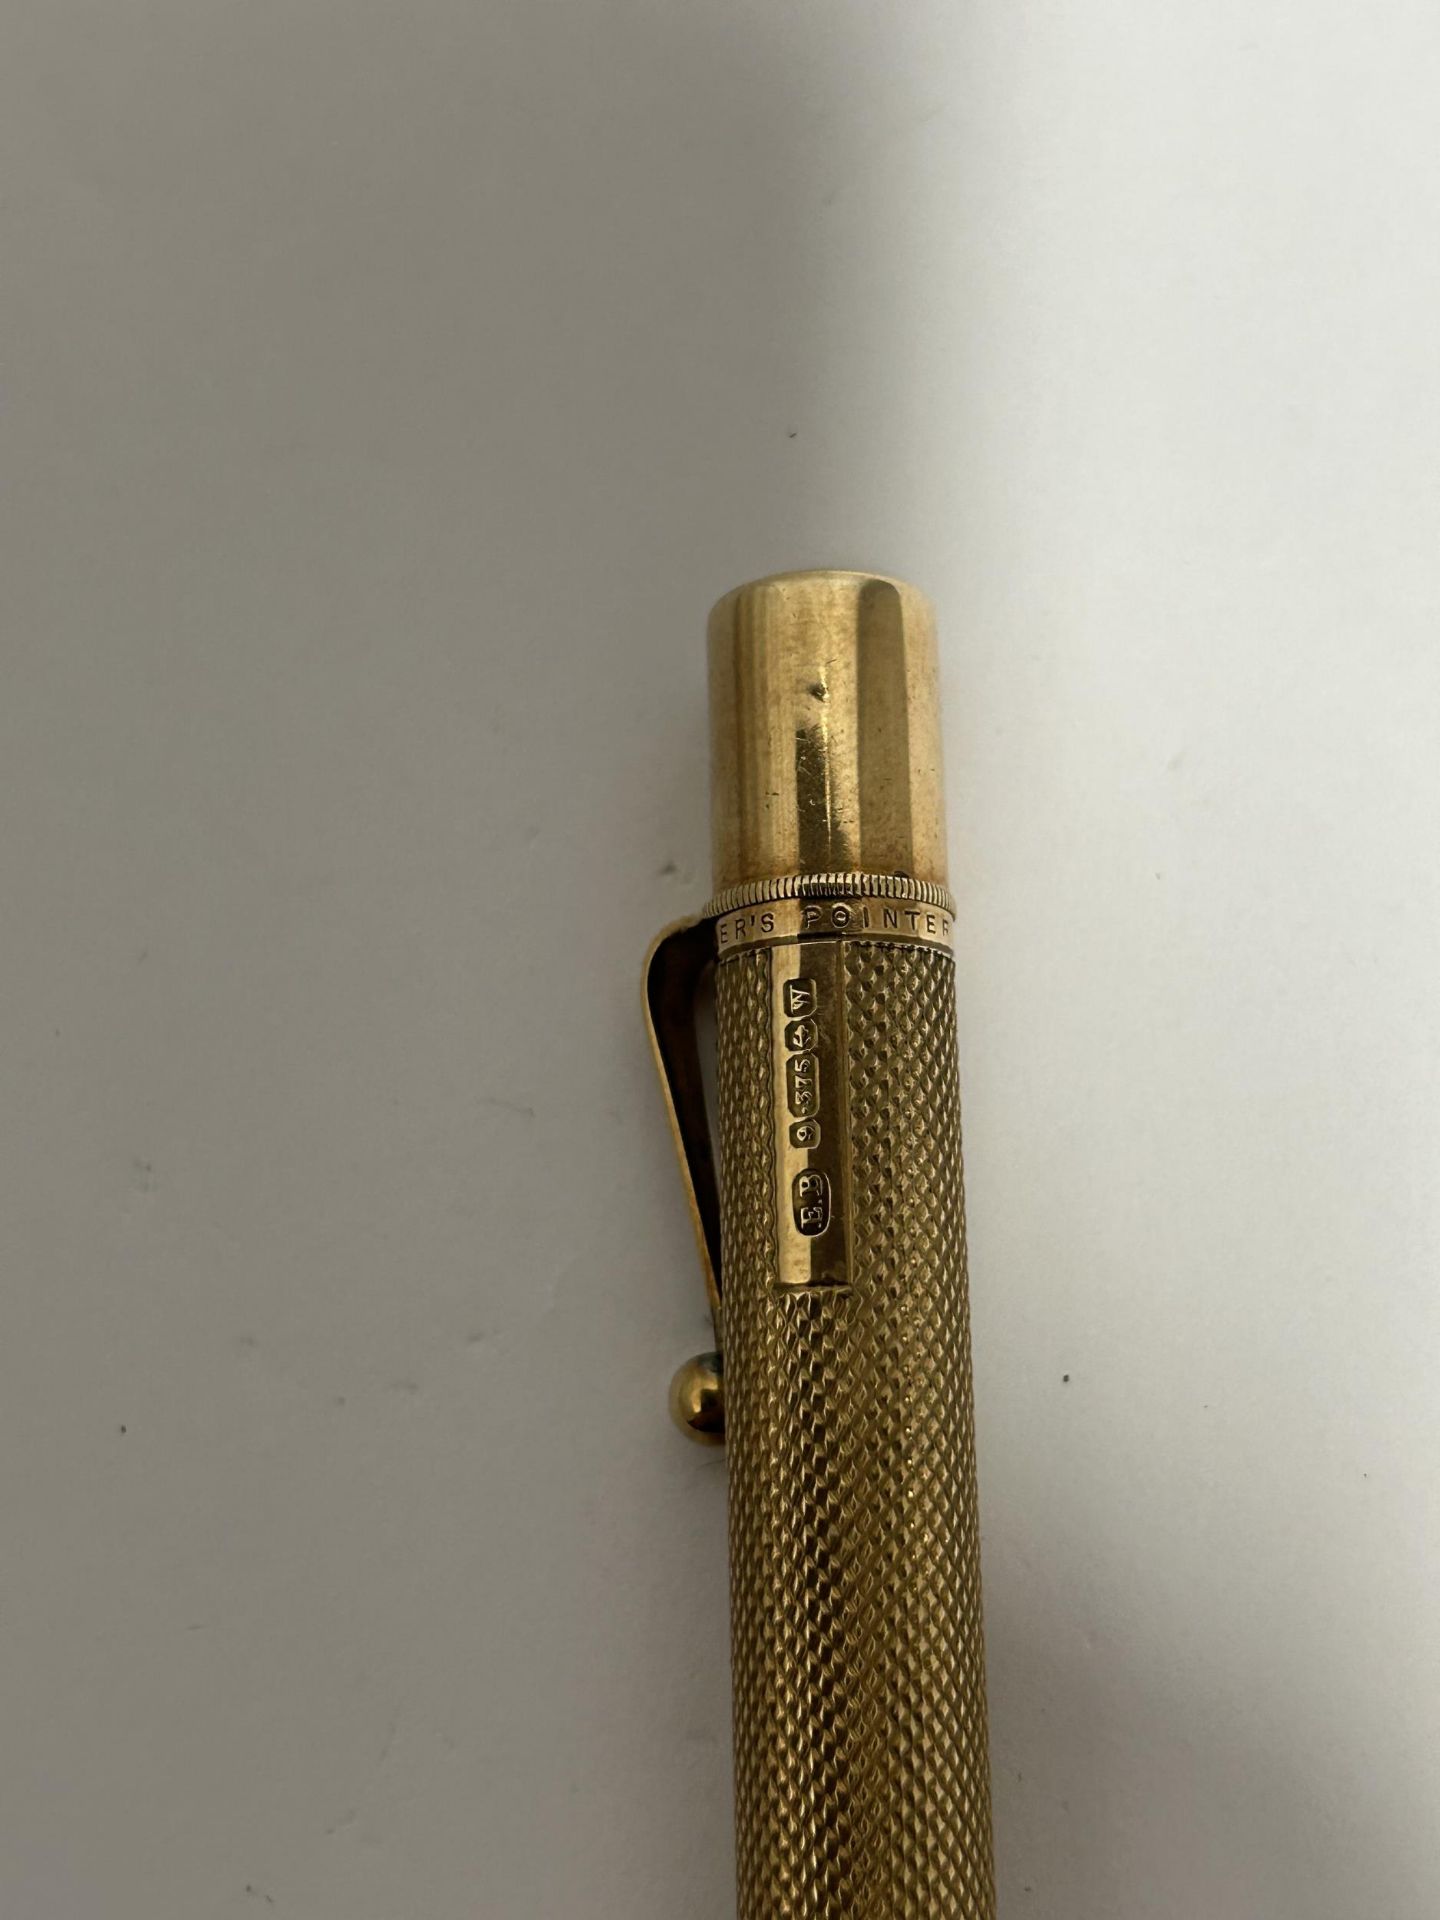 A HALLMARKED 9CT YELLOW GOLD BAKERS POINTER PROPELLING PENCIL GROSS WEIGHT 33.13 GRAMS - Image 3 of 6